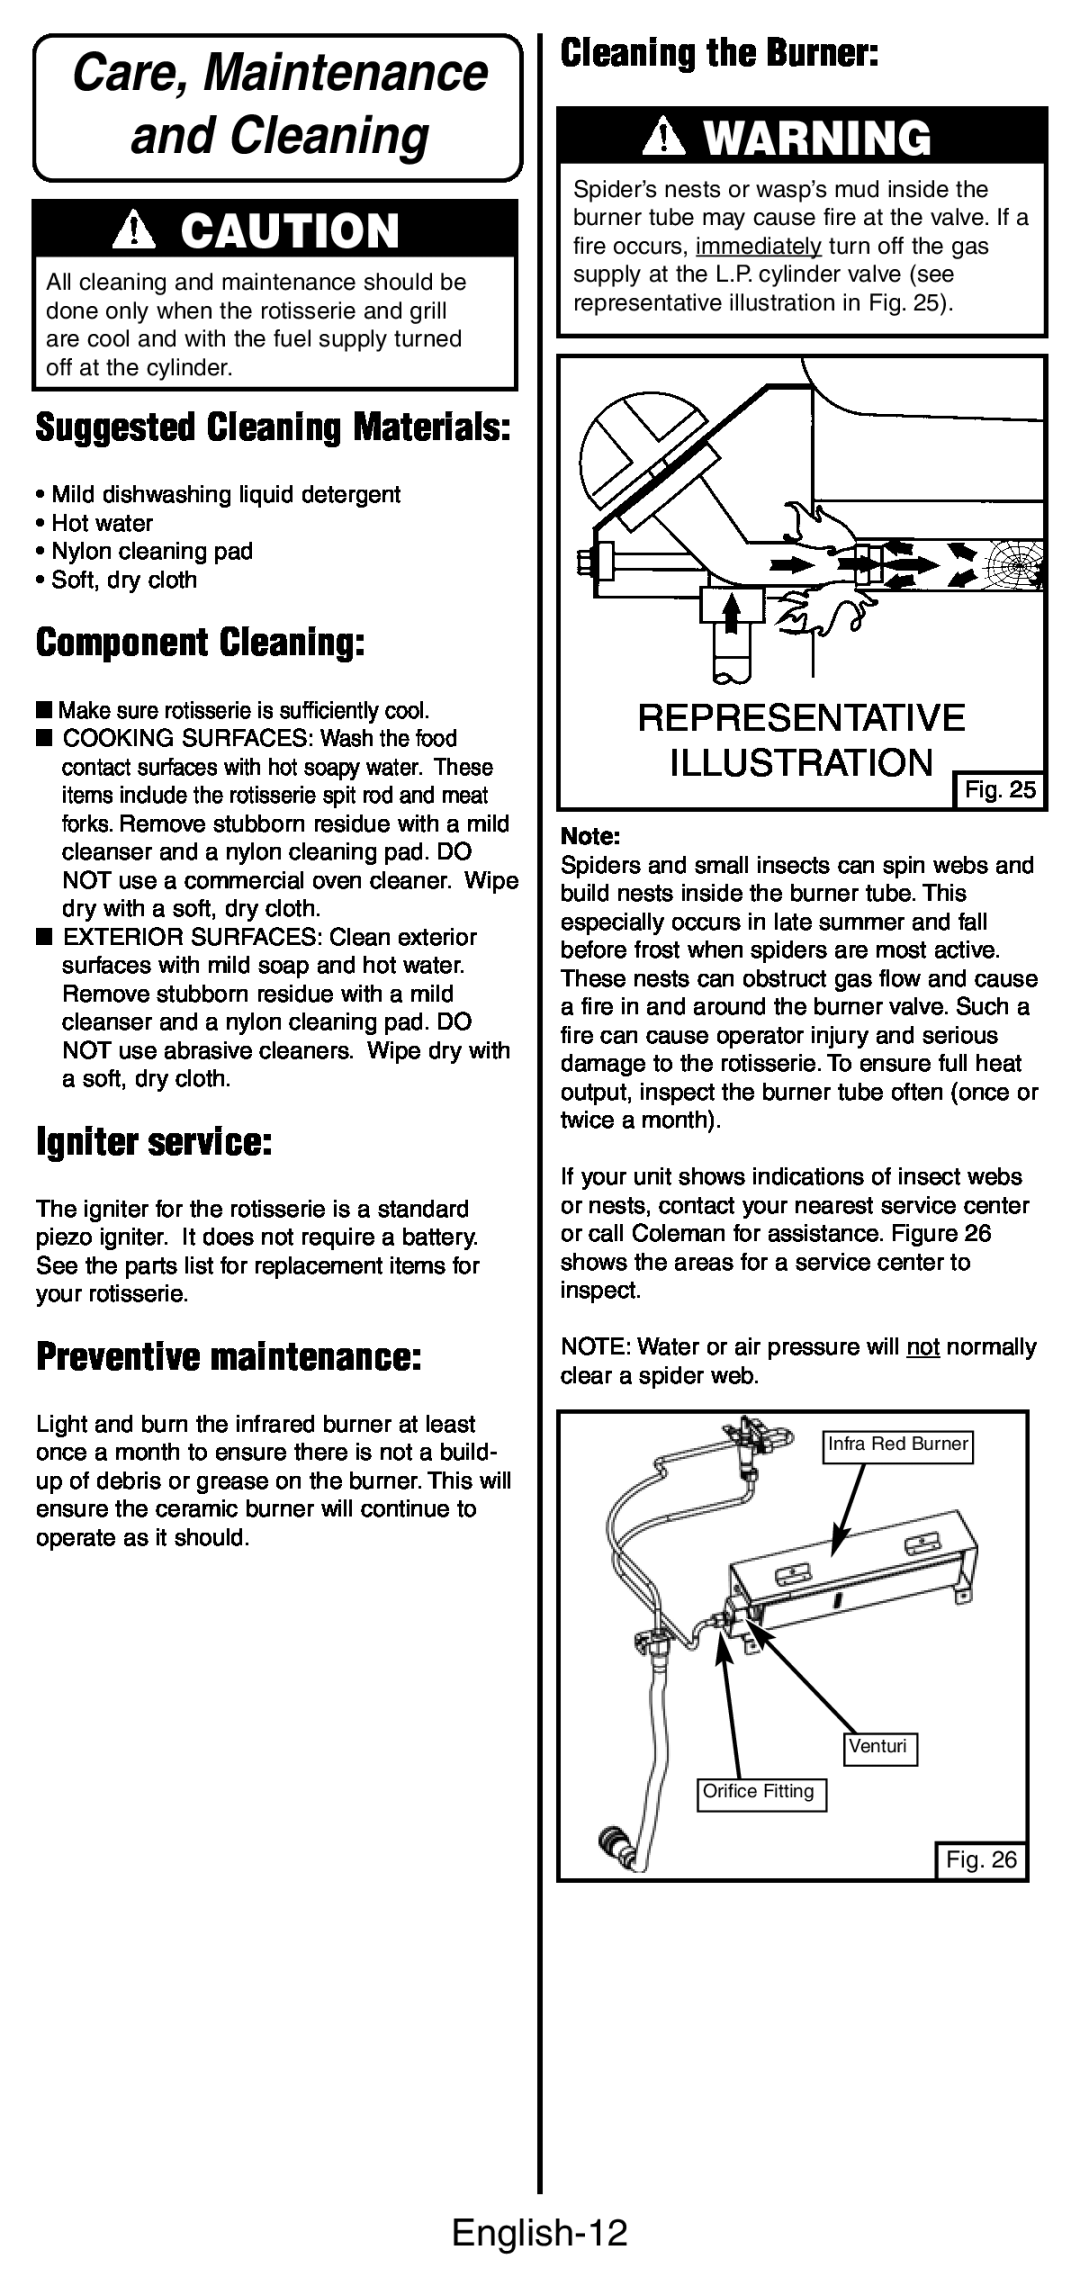 Coleman 9987 Series and Cleaning, Care, Maintenance, Representative Illustration, English-12, Suggested Cleaning Materials 